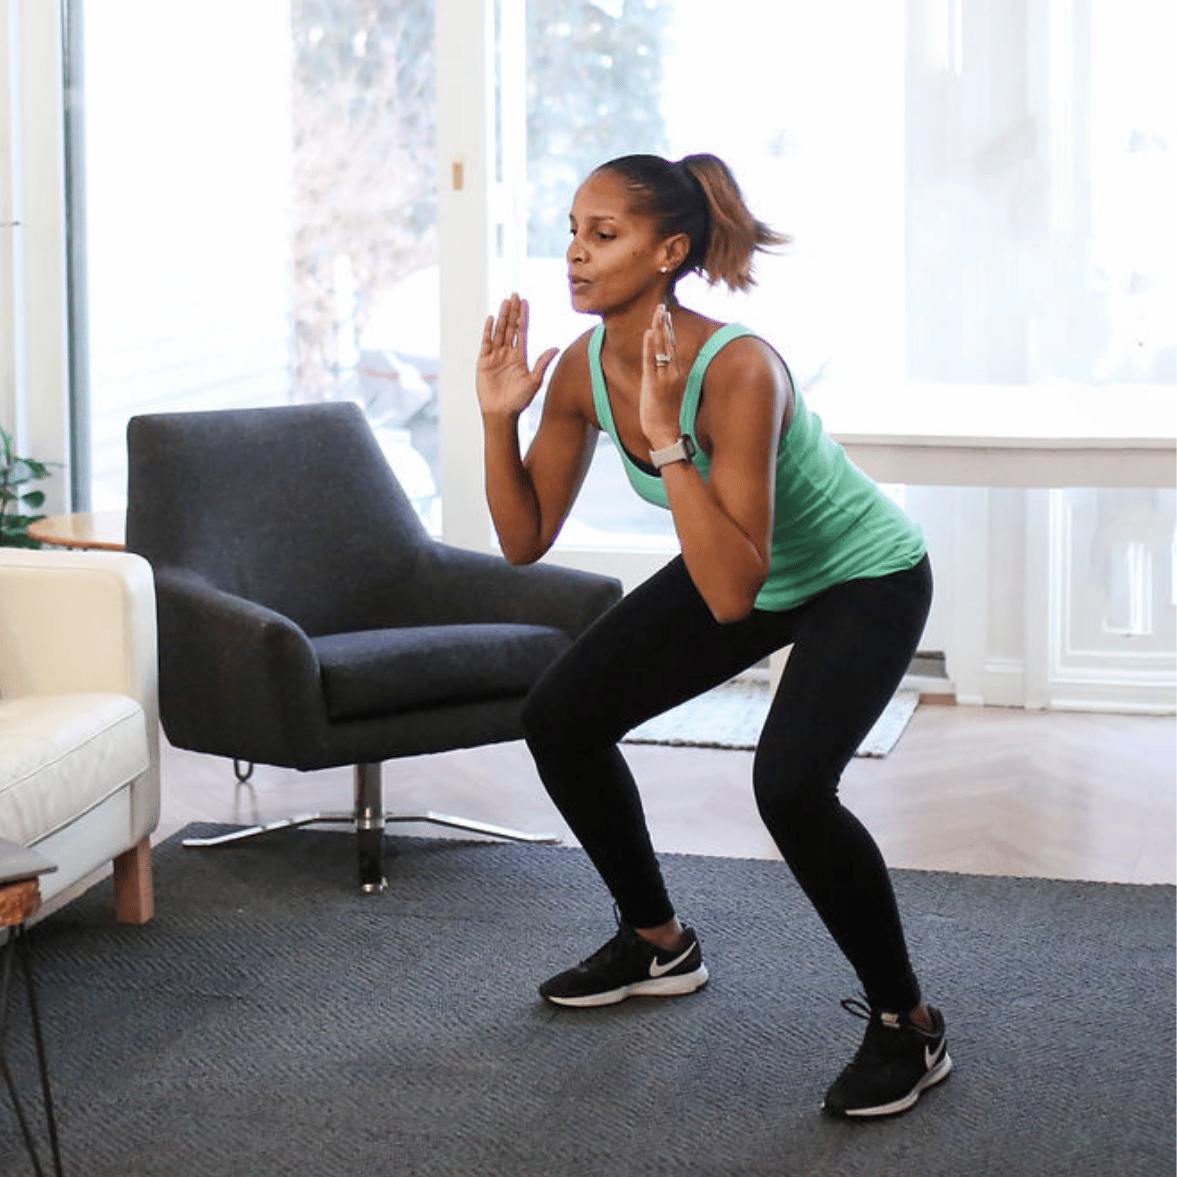 20-Minute Full Body Workout: Exercises and Tips